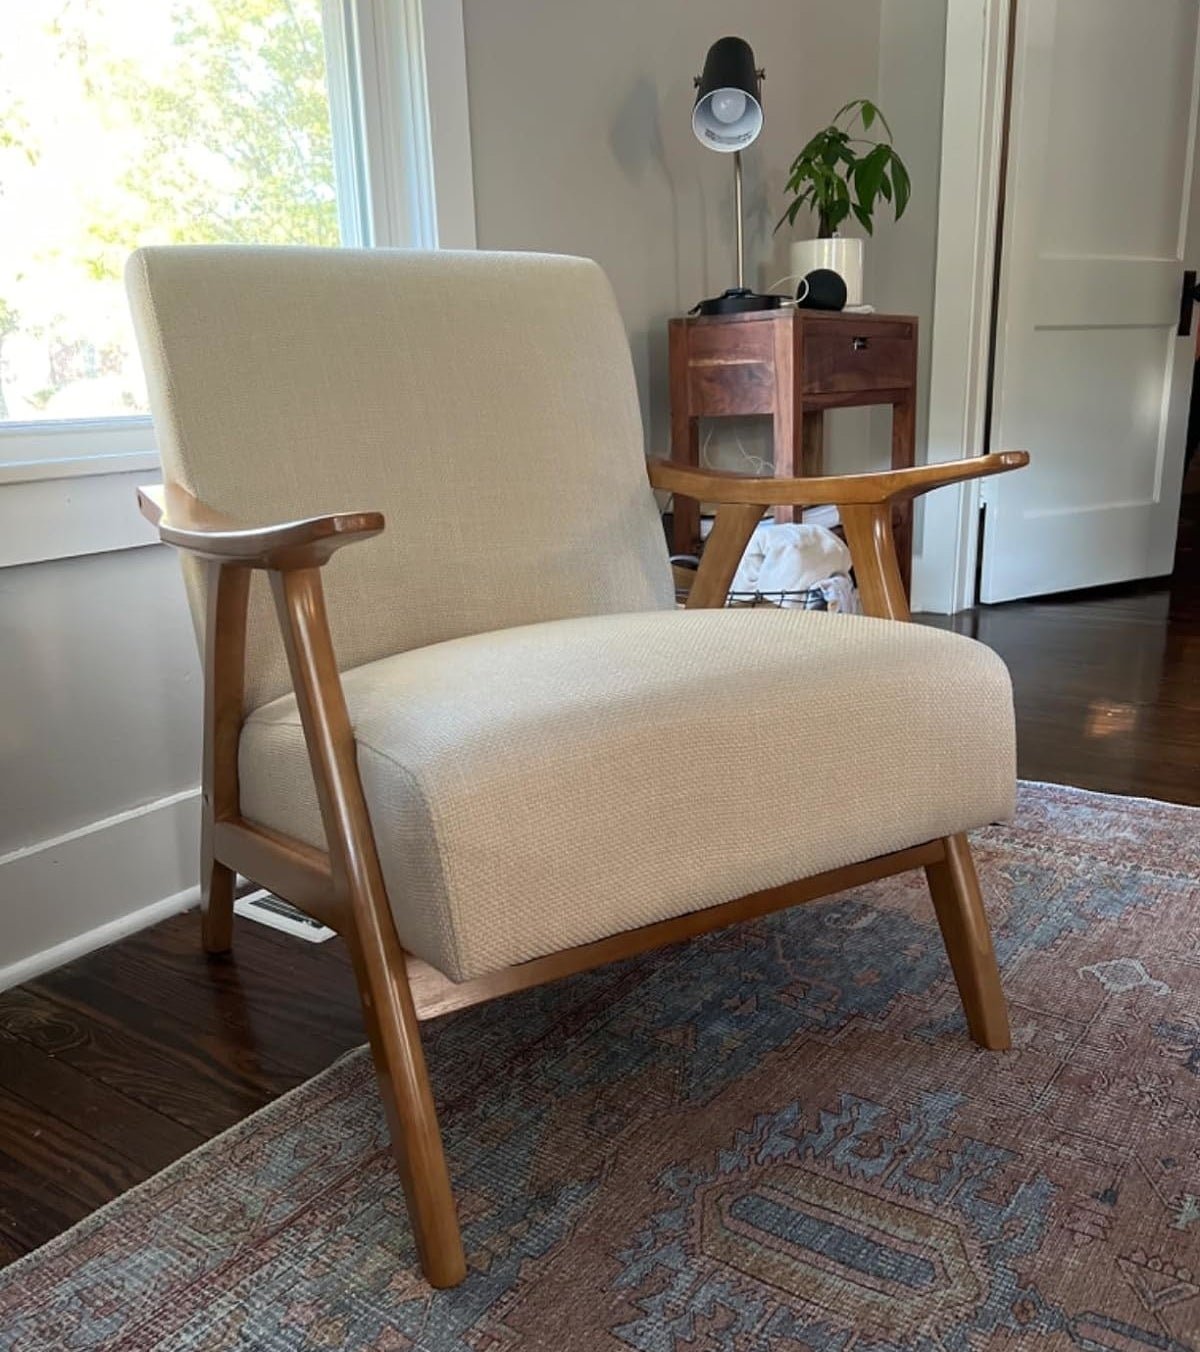 Mid-century modern style armchair with wooden frame in a home setting